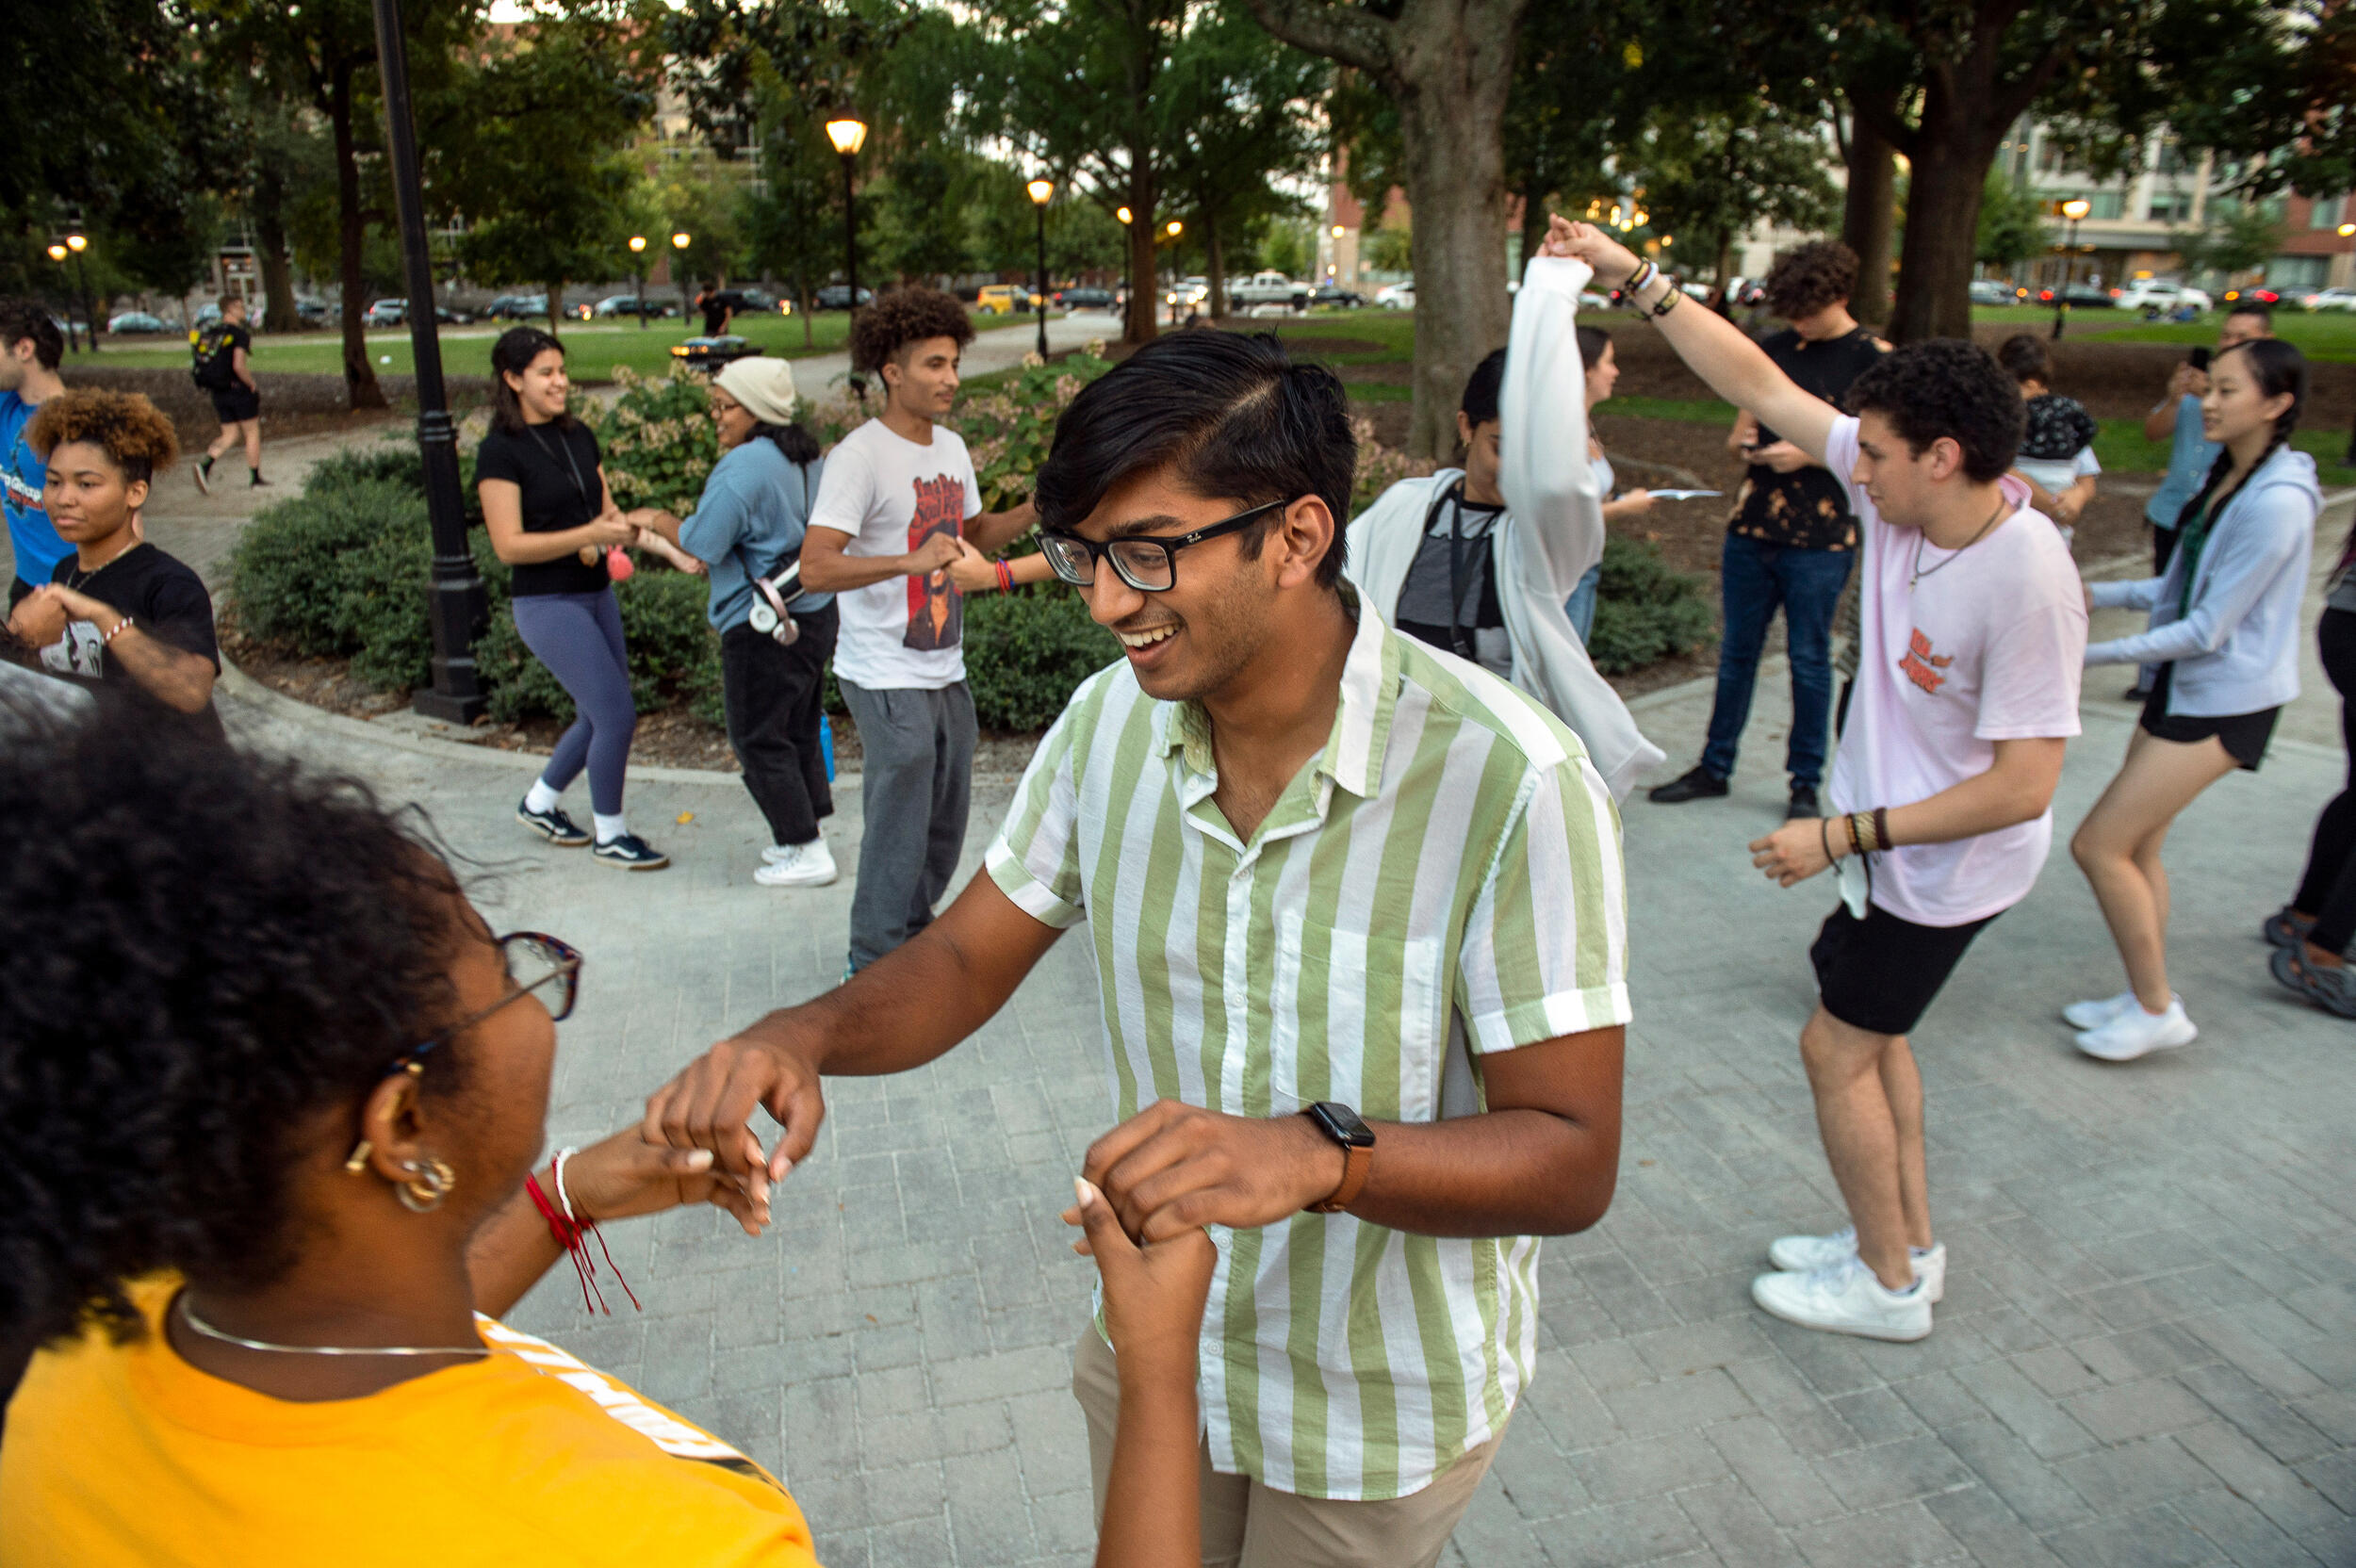 A student dances with another student while other students dance around a brick sidewalk next to a green space in Monroe Park.